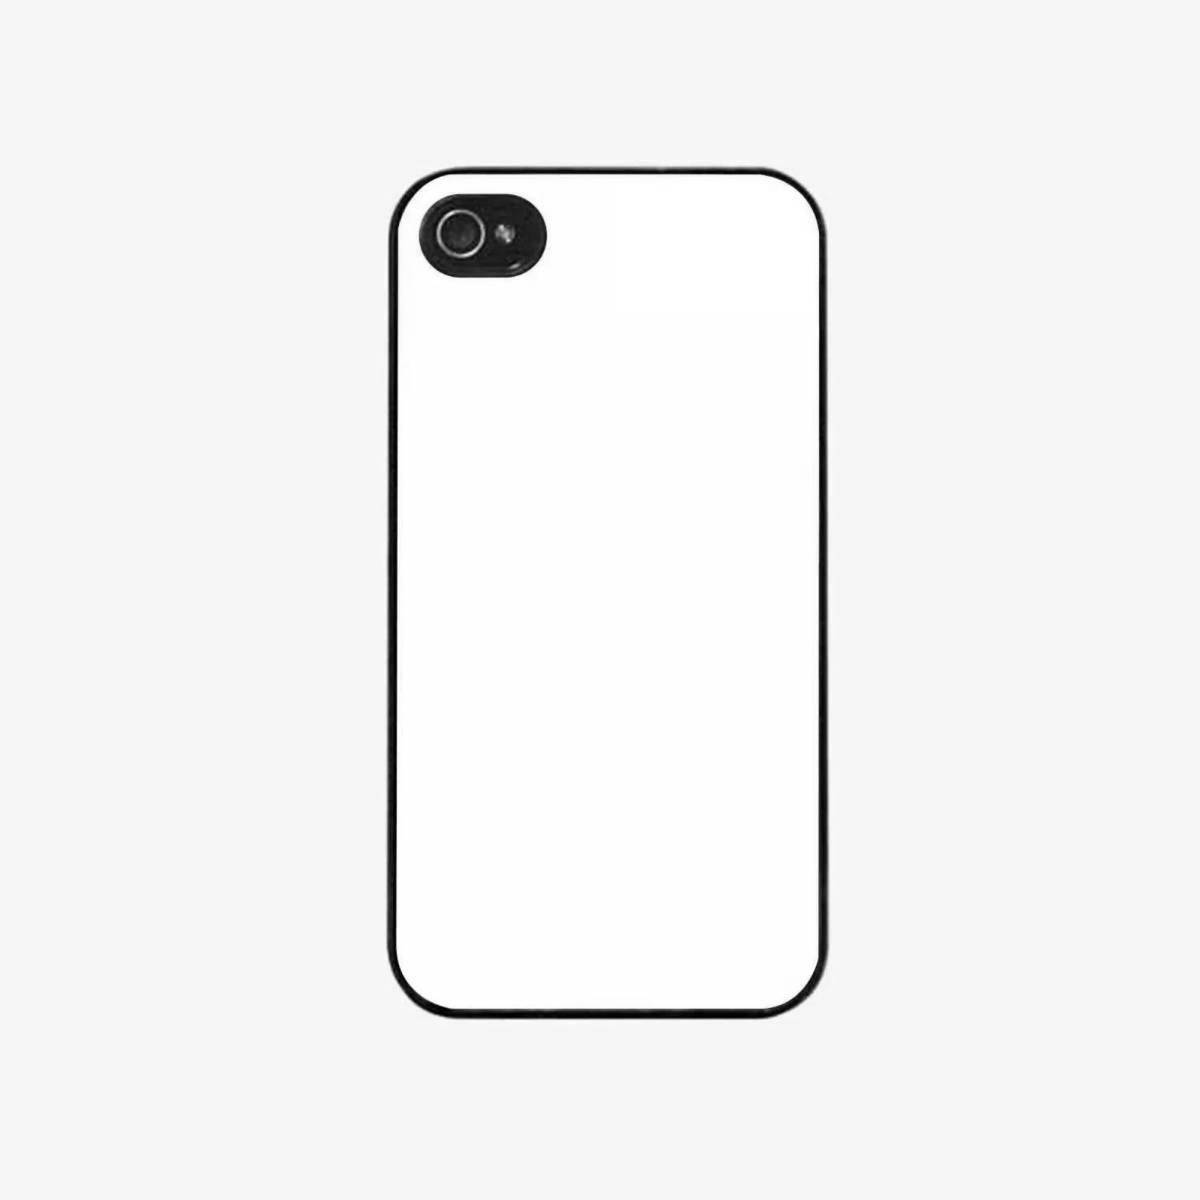 Colouring adorable iphone 11